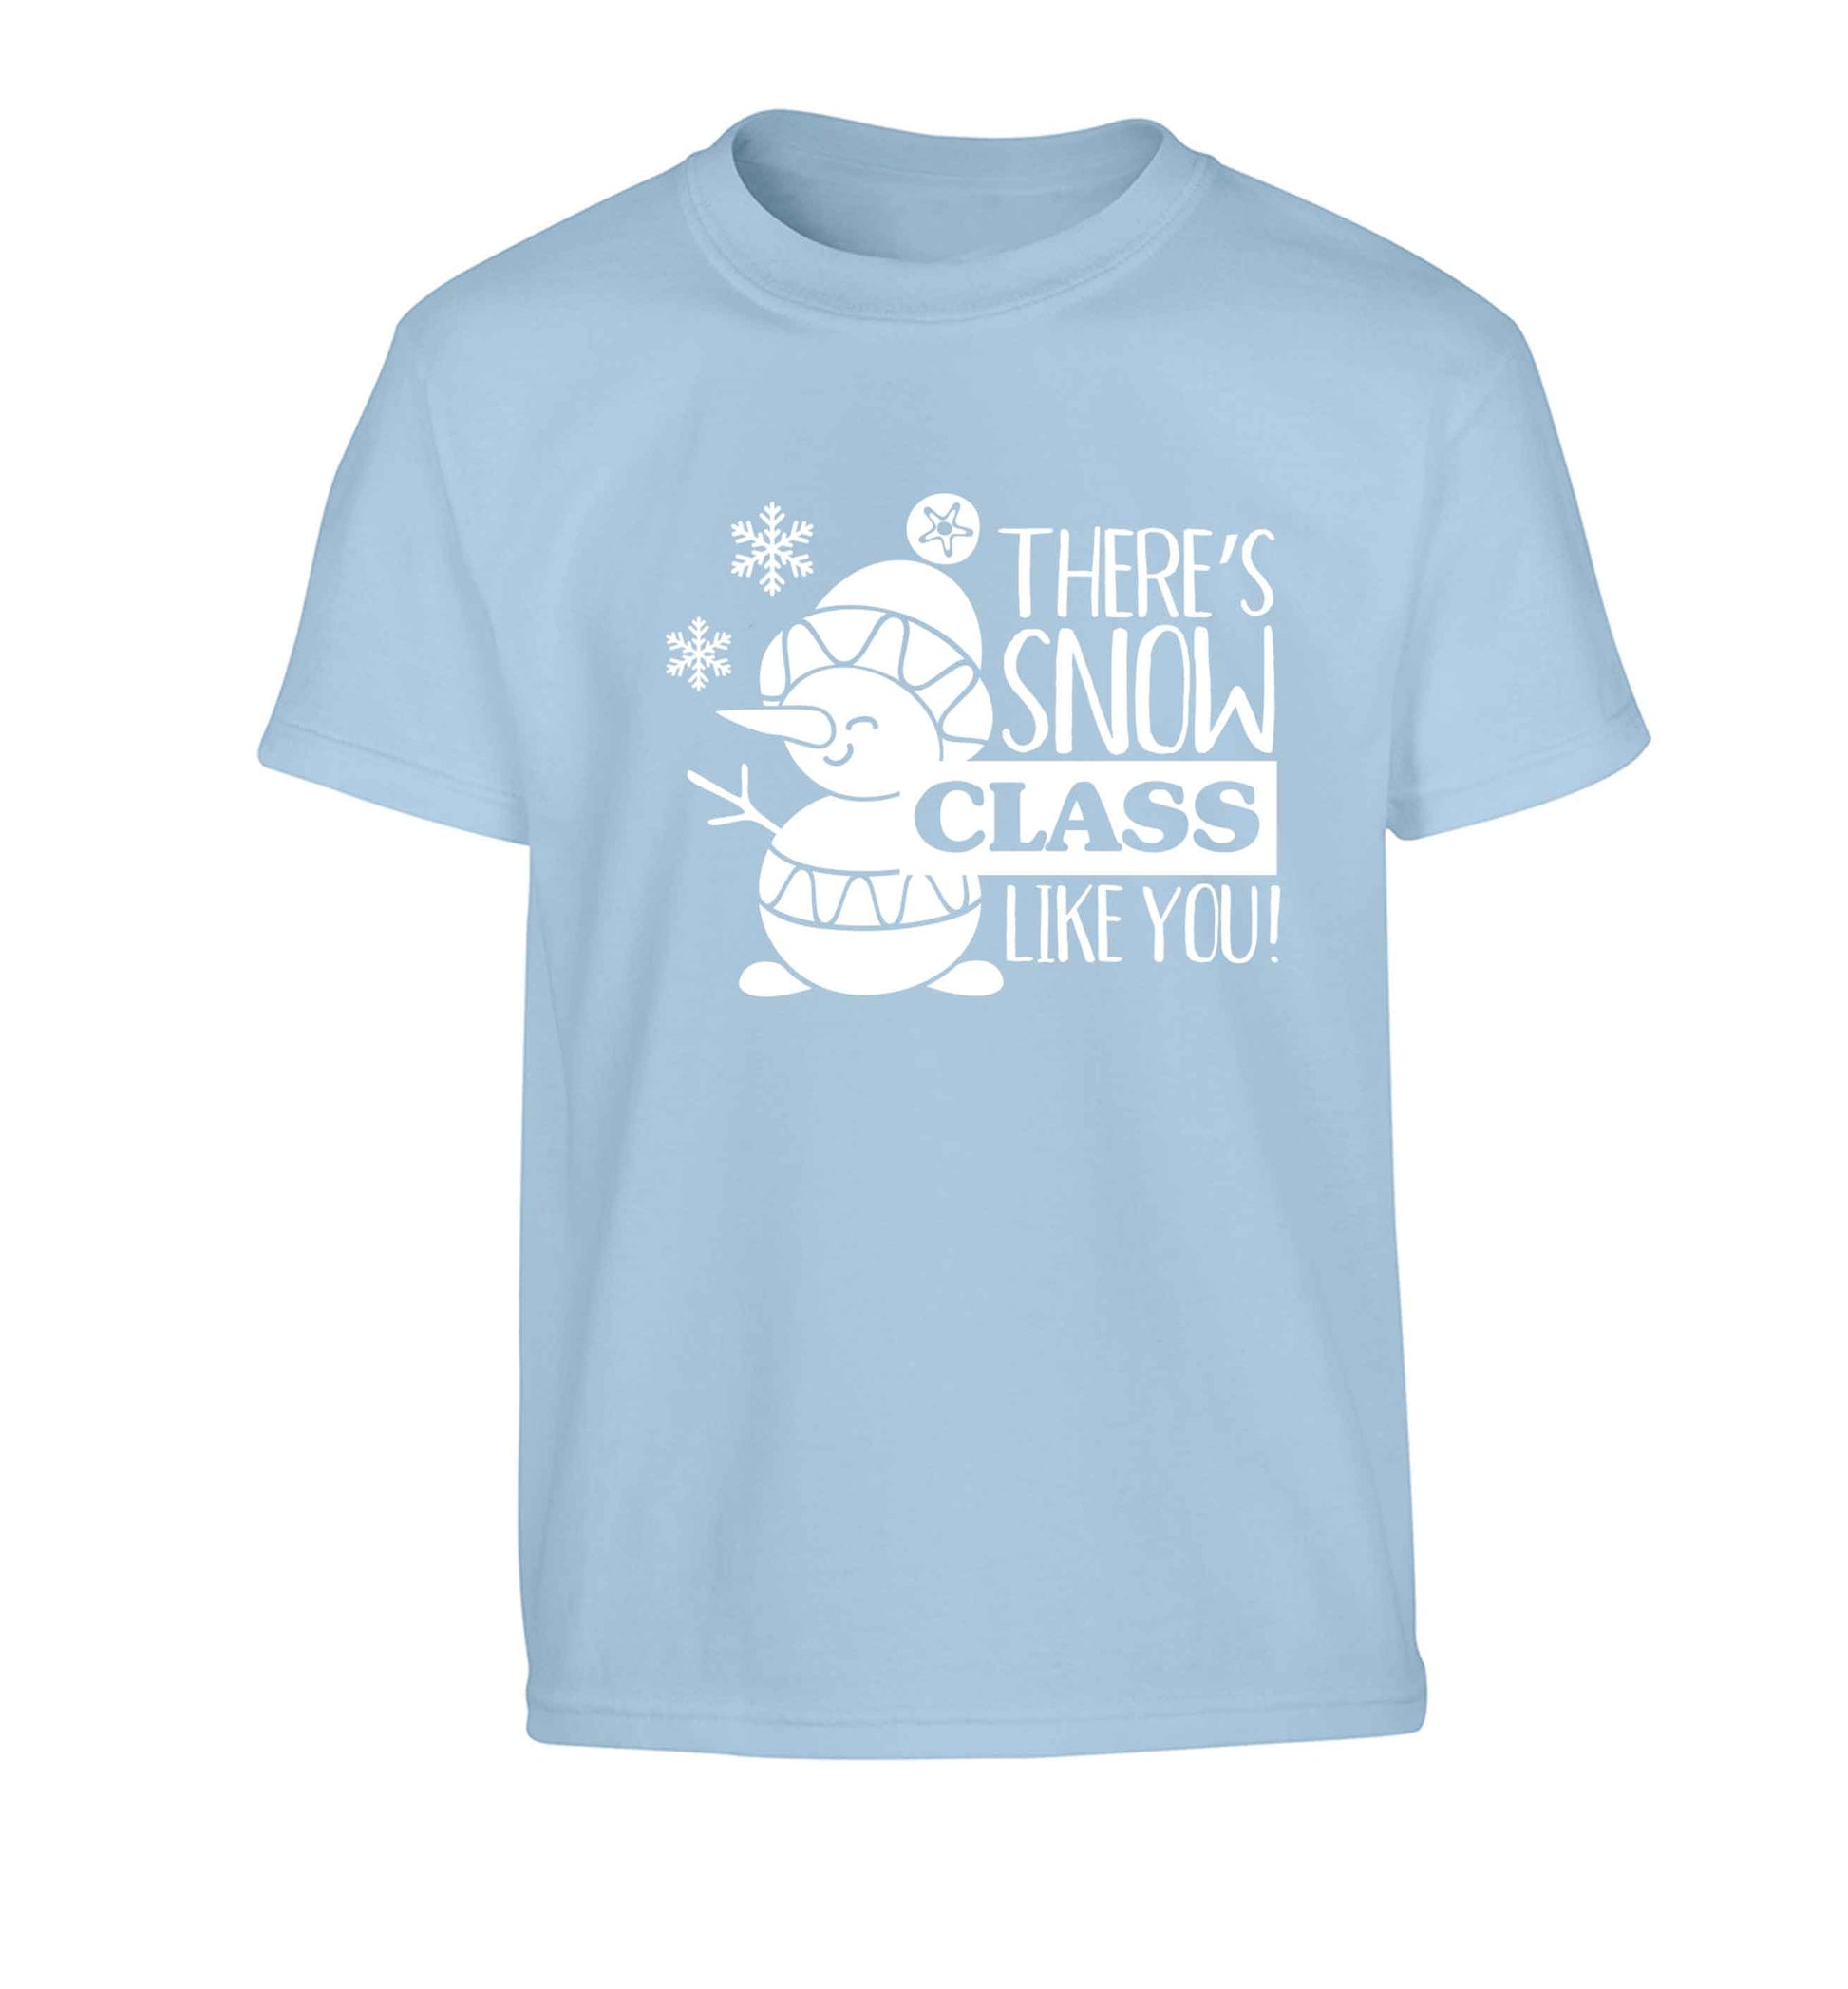 There's snow class like you Children's light blue Tshirt 12-13 Years